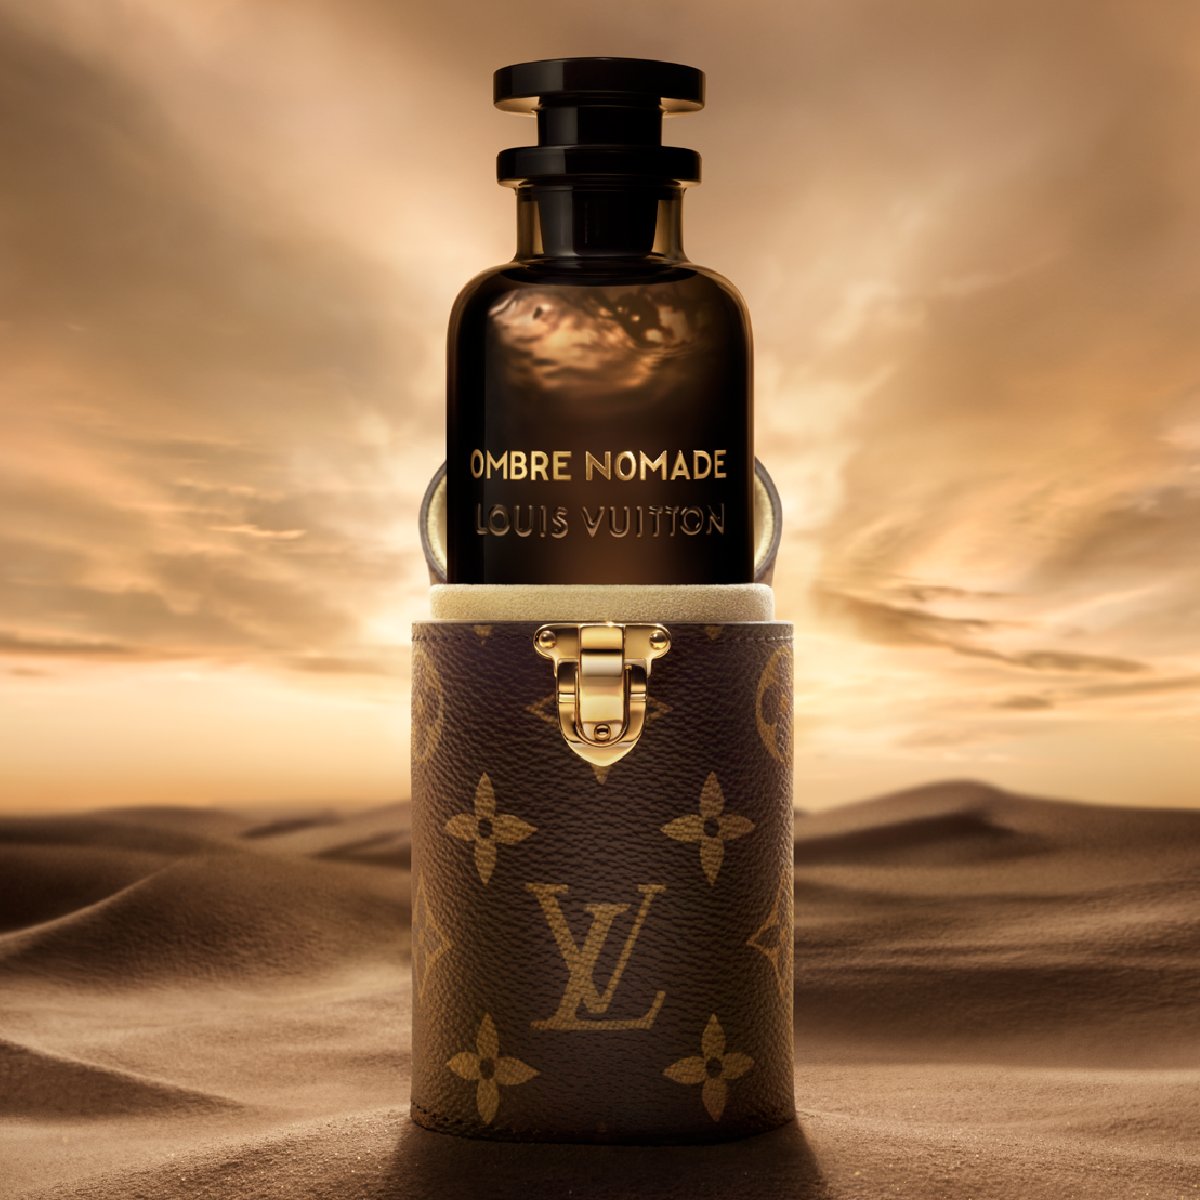 Louis Vuitton on X: A shadow in the desert. Designed by Master Perfumer  Jacques Cavallier Belletrud for lovers of rare essences, Ombre Nomade  evokes the mystical powers of oud. Explore the iconic #